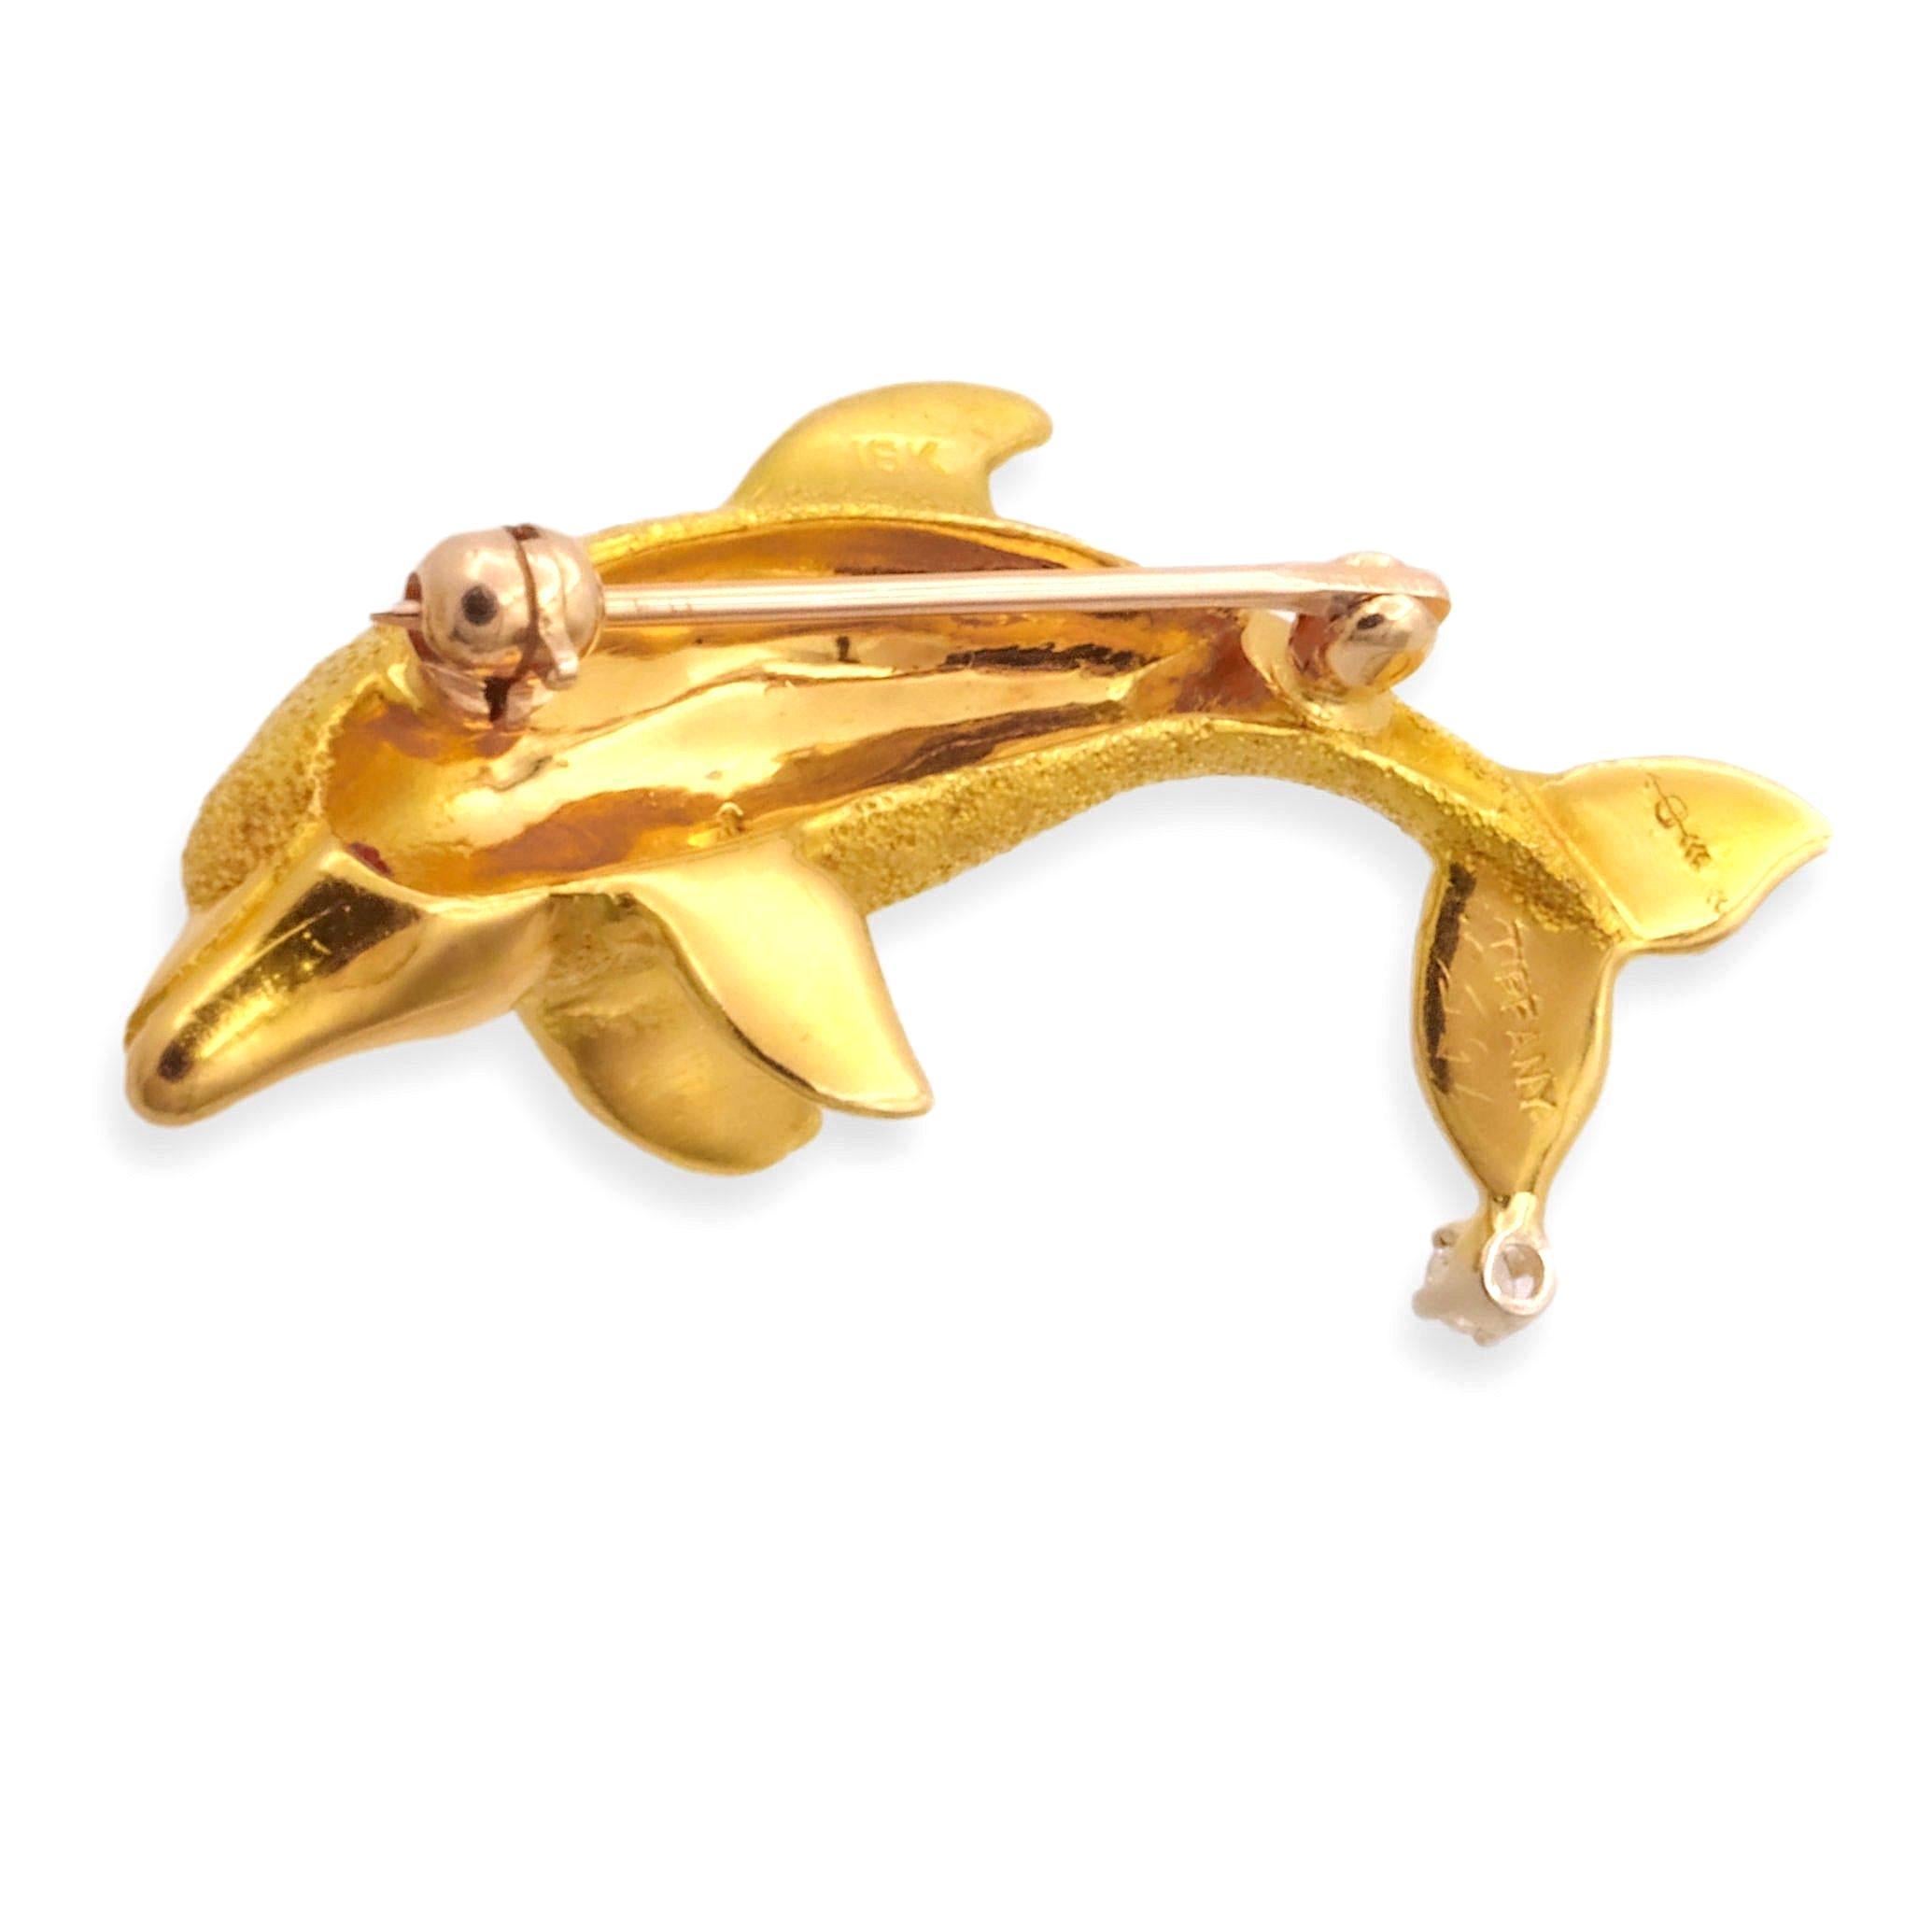 Vintage Tiffany & Co. dolphin brooch finely crafted in highly textured 18 Karat yellow gold with one deep red ruby eye and one diamond set in 4 prongs in the tail. This brooch has a sandblasted finish and texture. Round brilliant diamond weighs 0.05